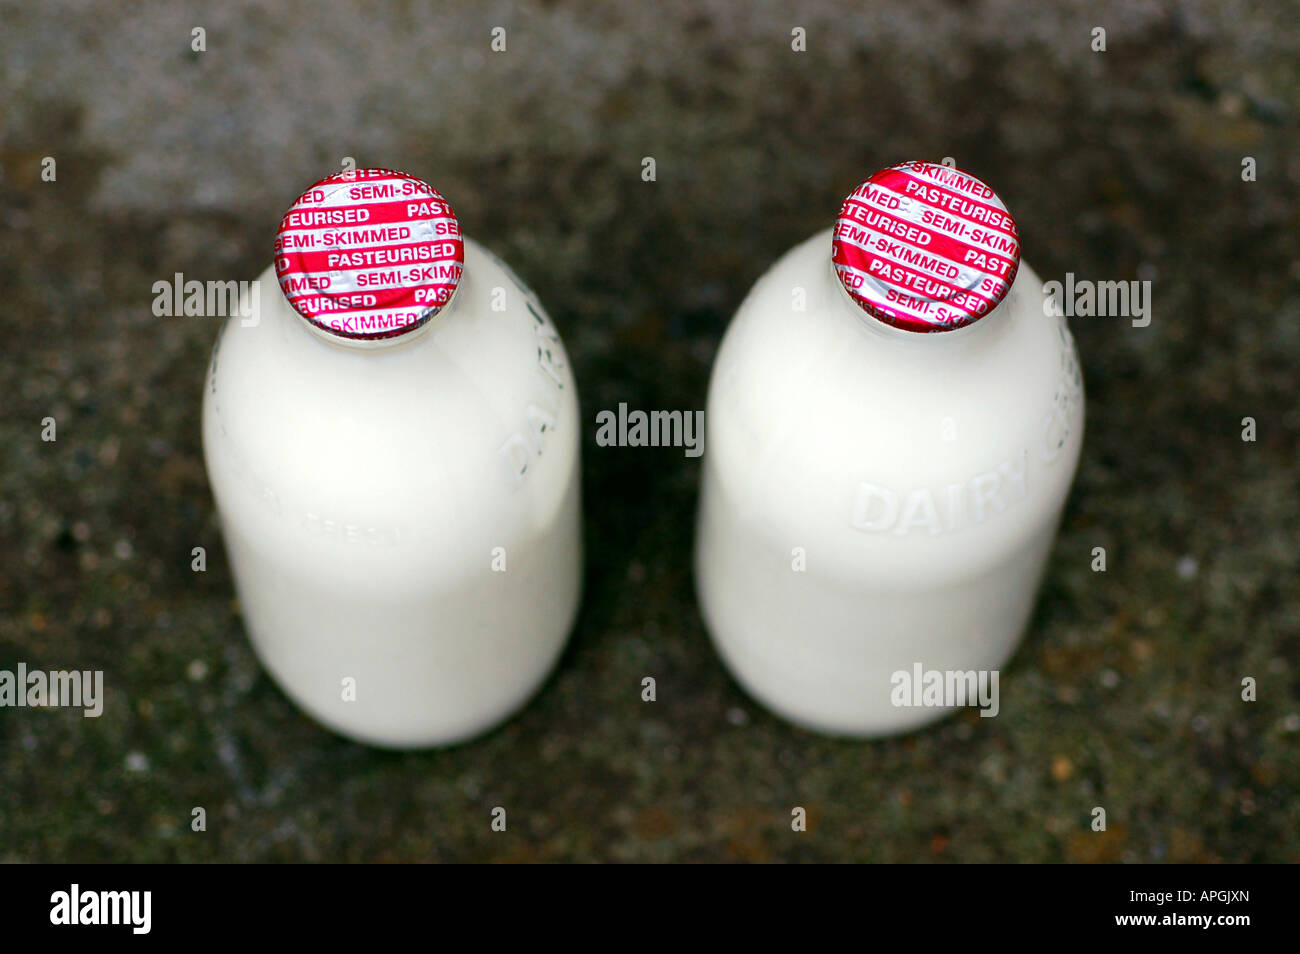 One pint bottles of milk delivered to a doorstep, UK Stock Photo